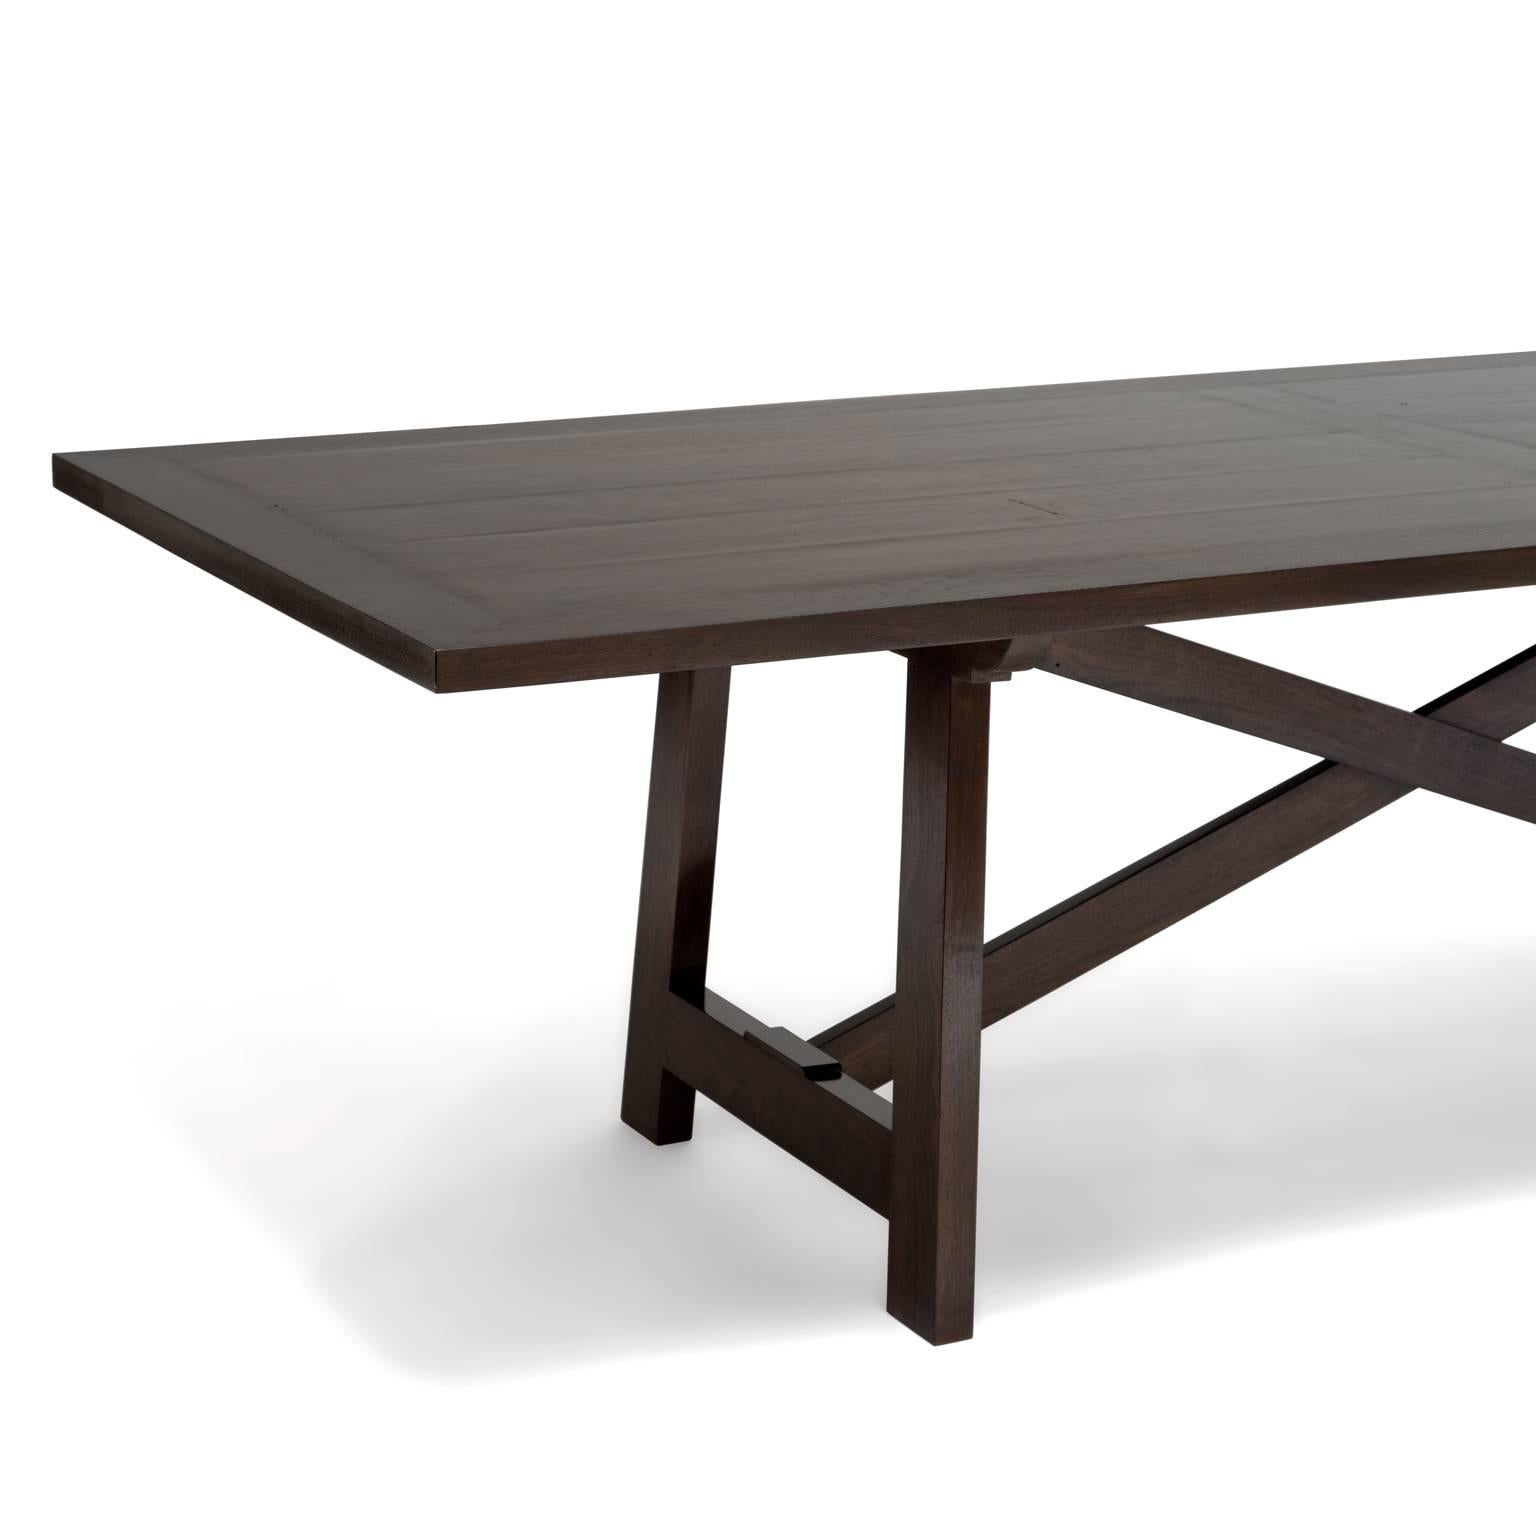 Atelier Demiurge Collection Siena Dining Table shown with inset 19th century walnut bordered top in mink finish. Inquire for finish and extension options.

Atelier Demiurge Collection pieces are made to order, and custom sizes are available. Please